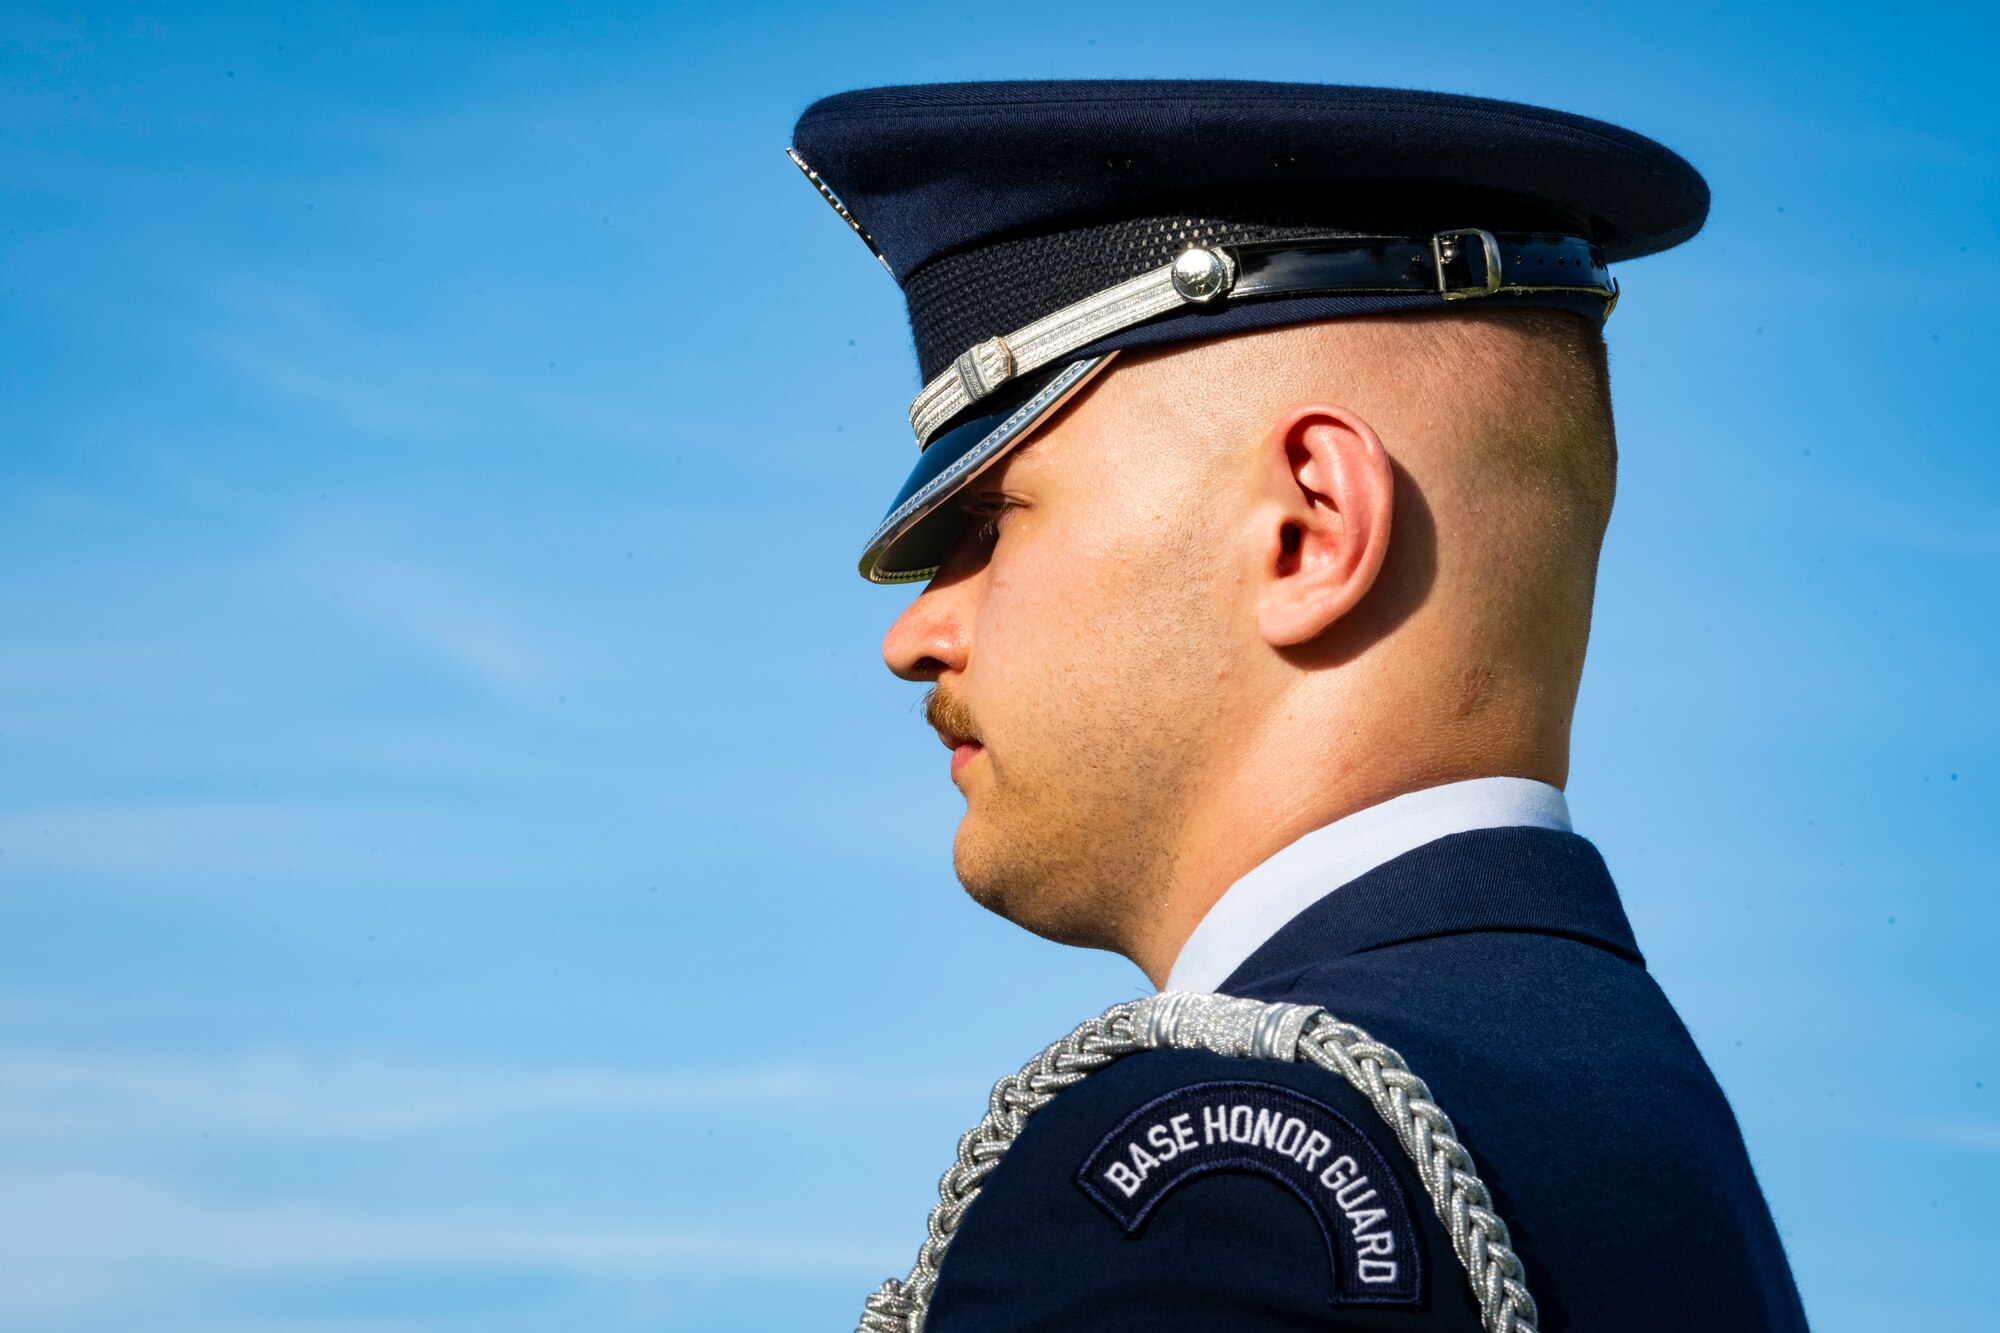 U.S. Air Force members in dress blues stands at attention with the sky in the background